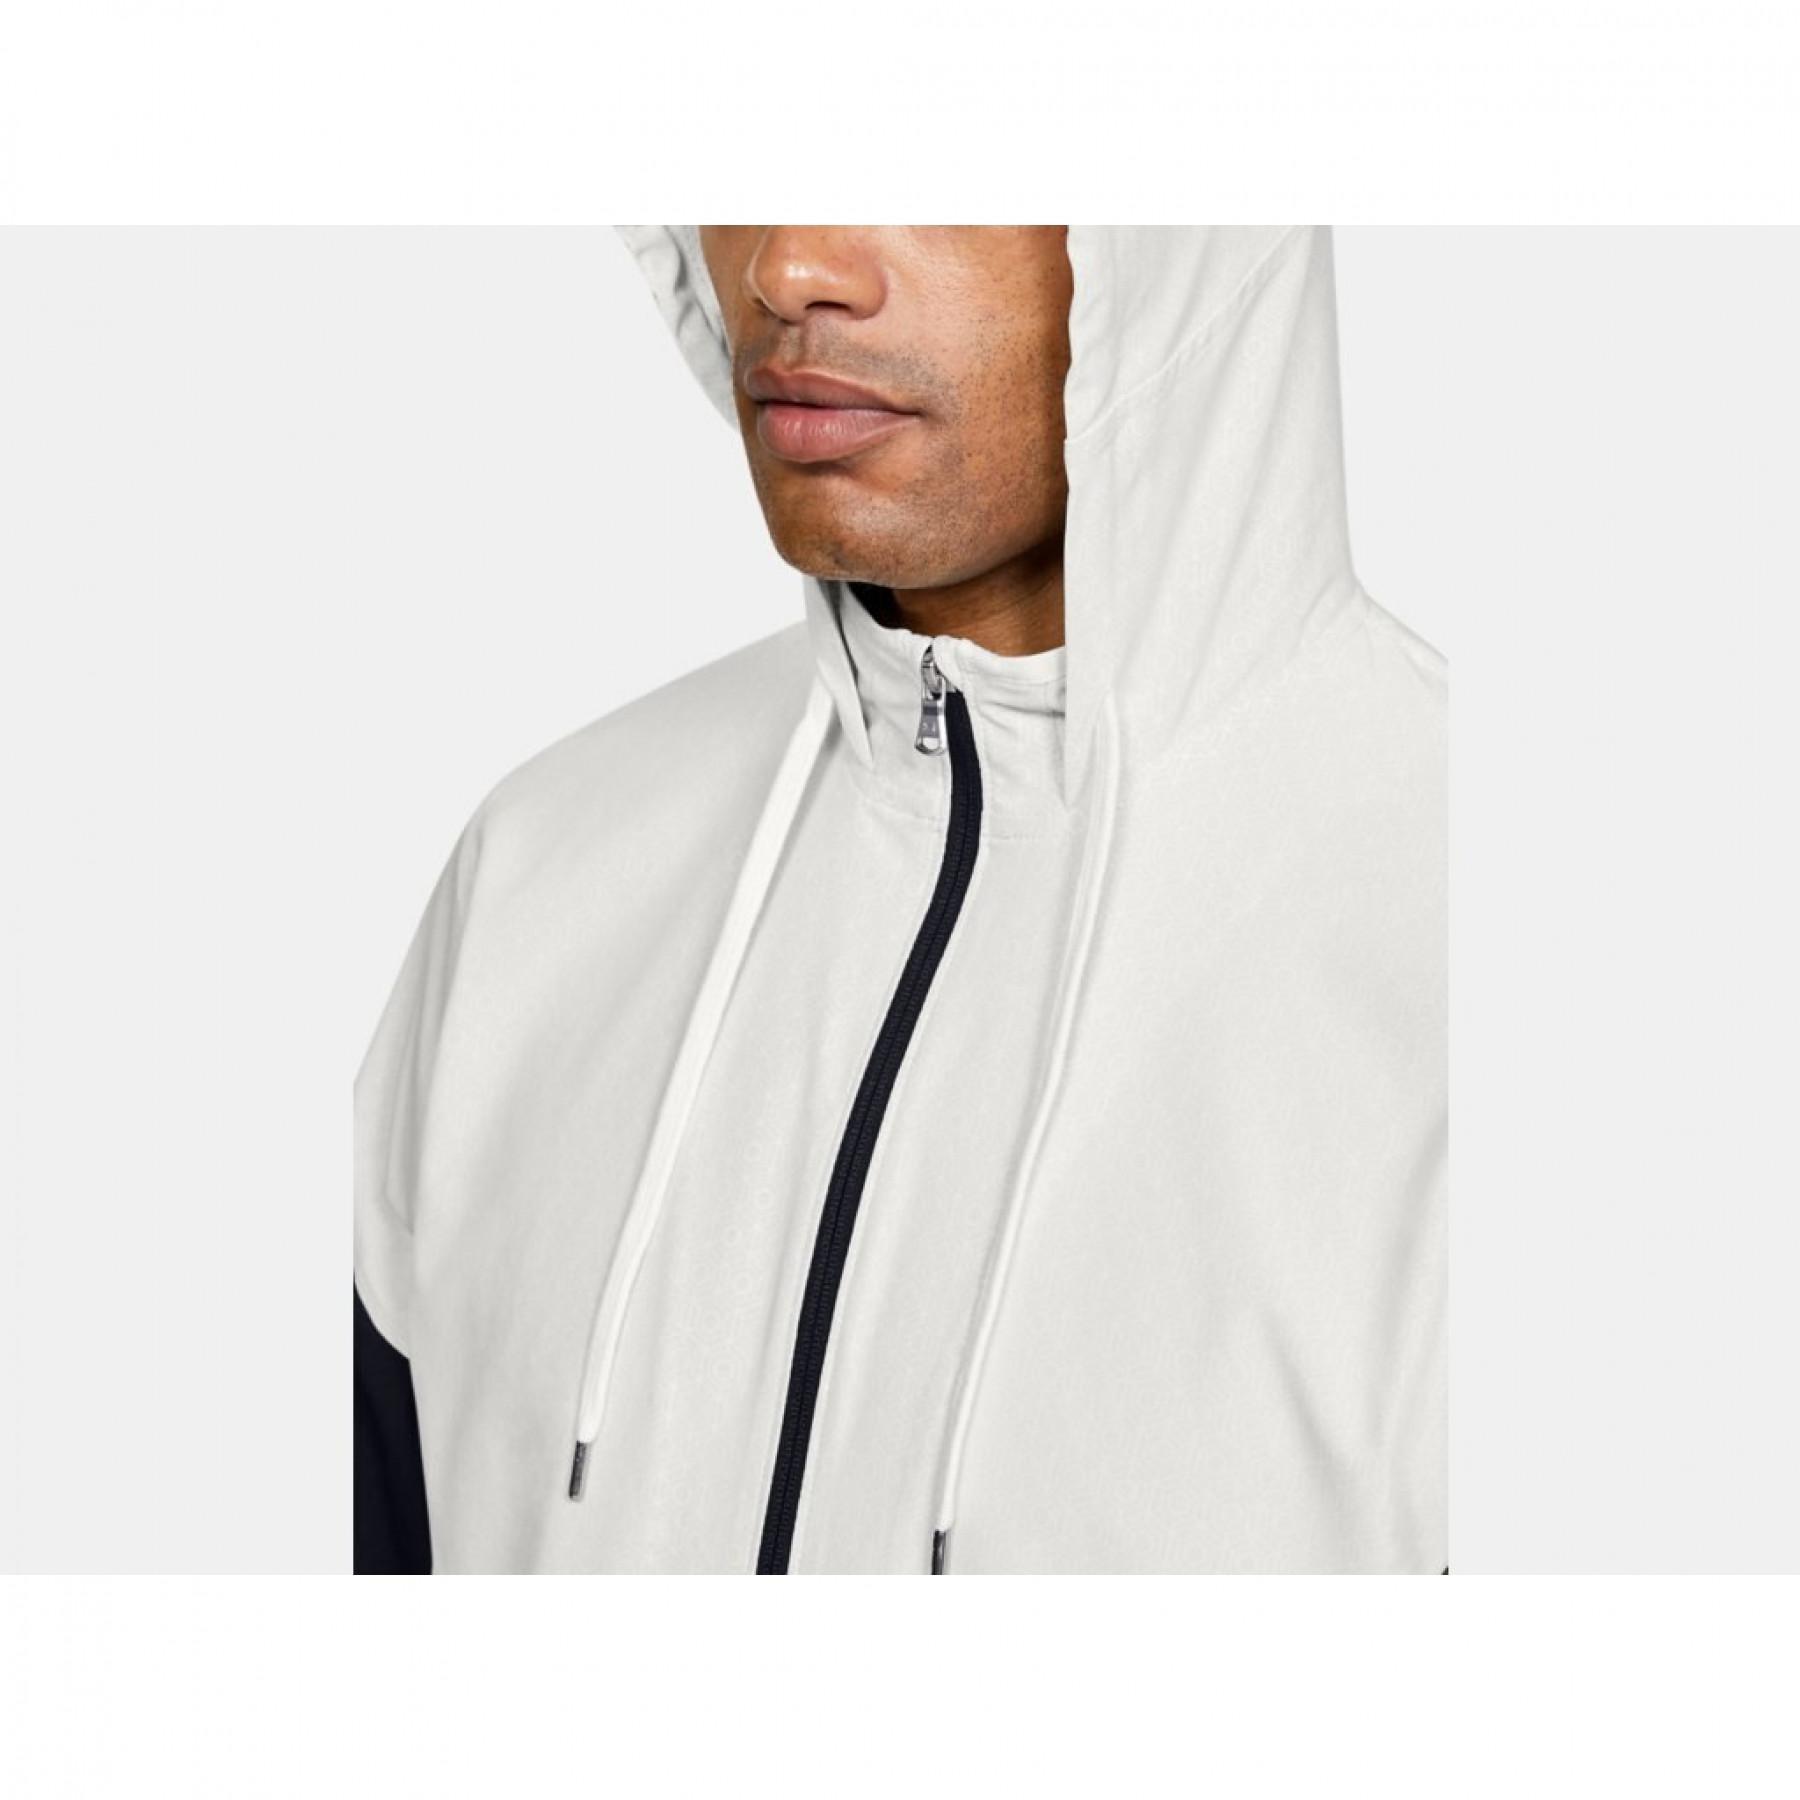 Jacket Under Armour Recover Woven Warm-Up